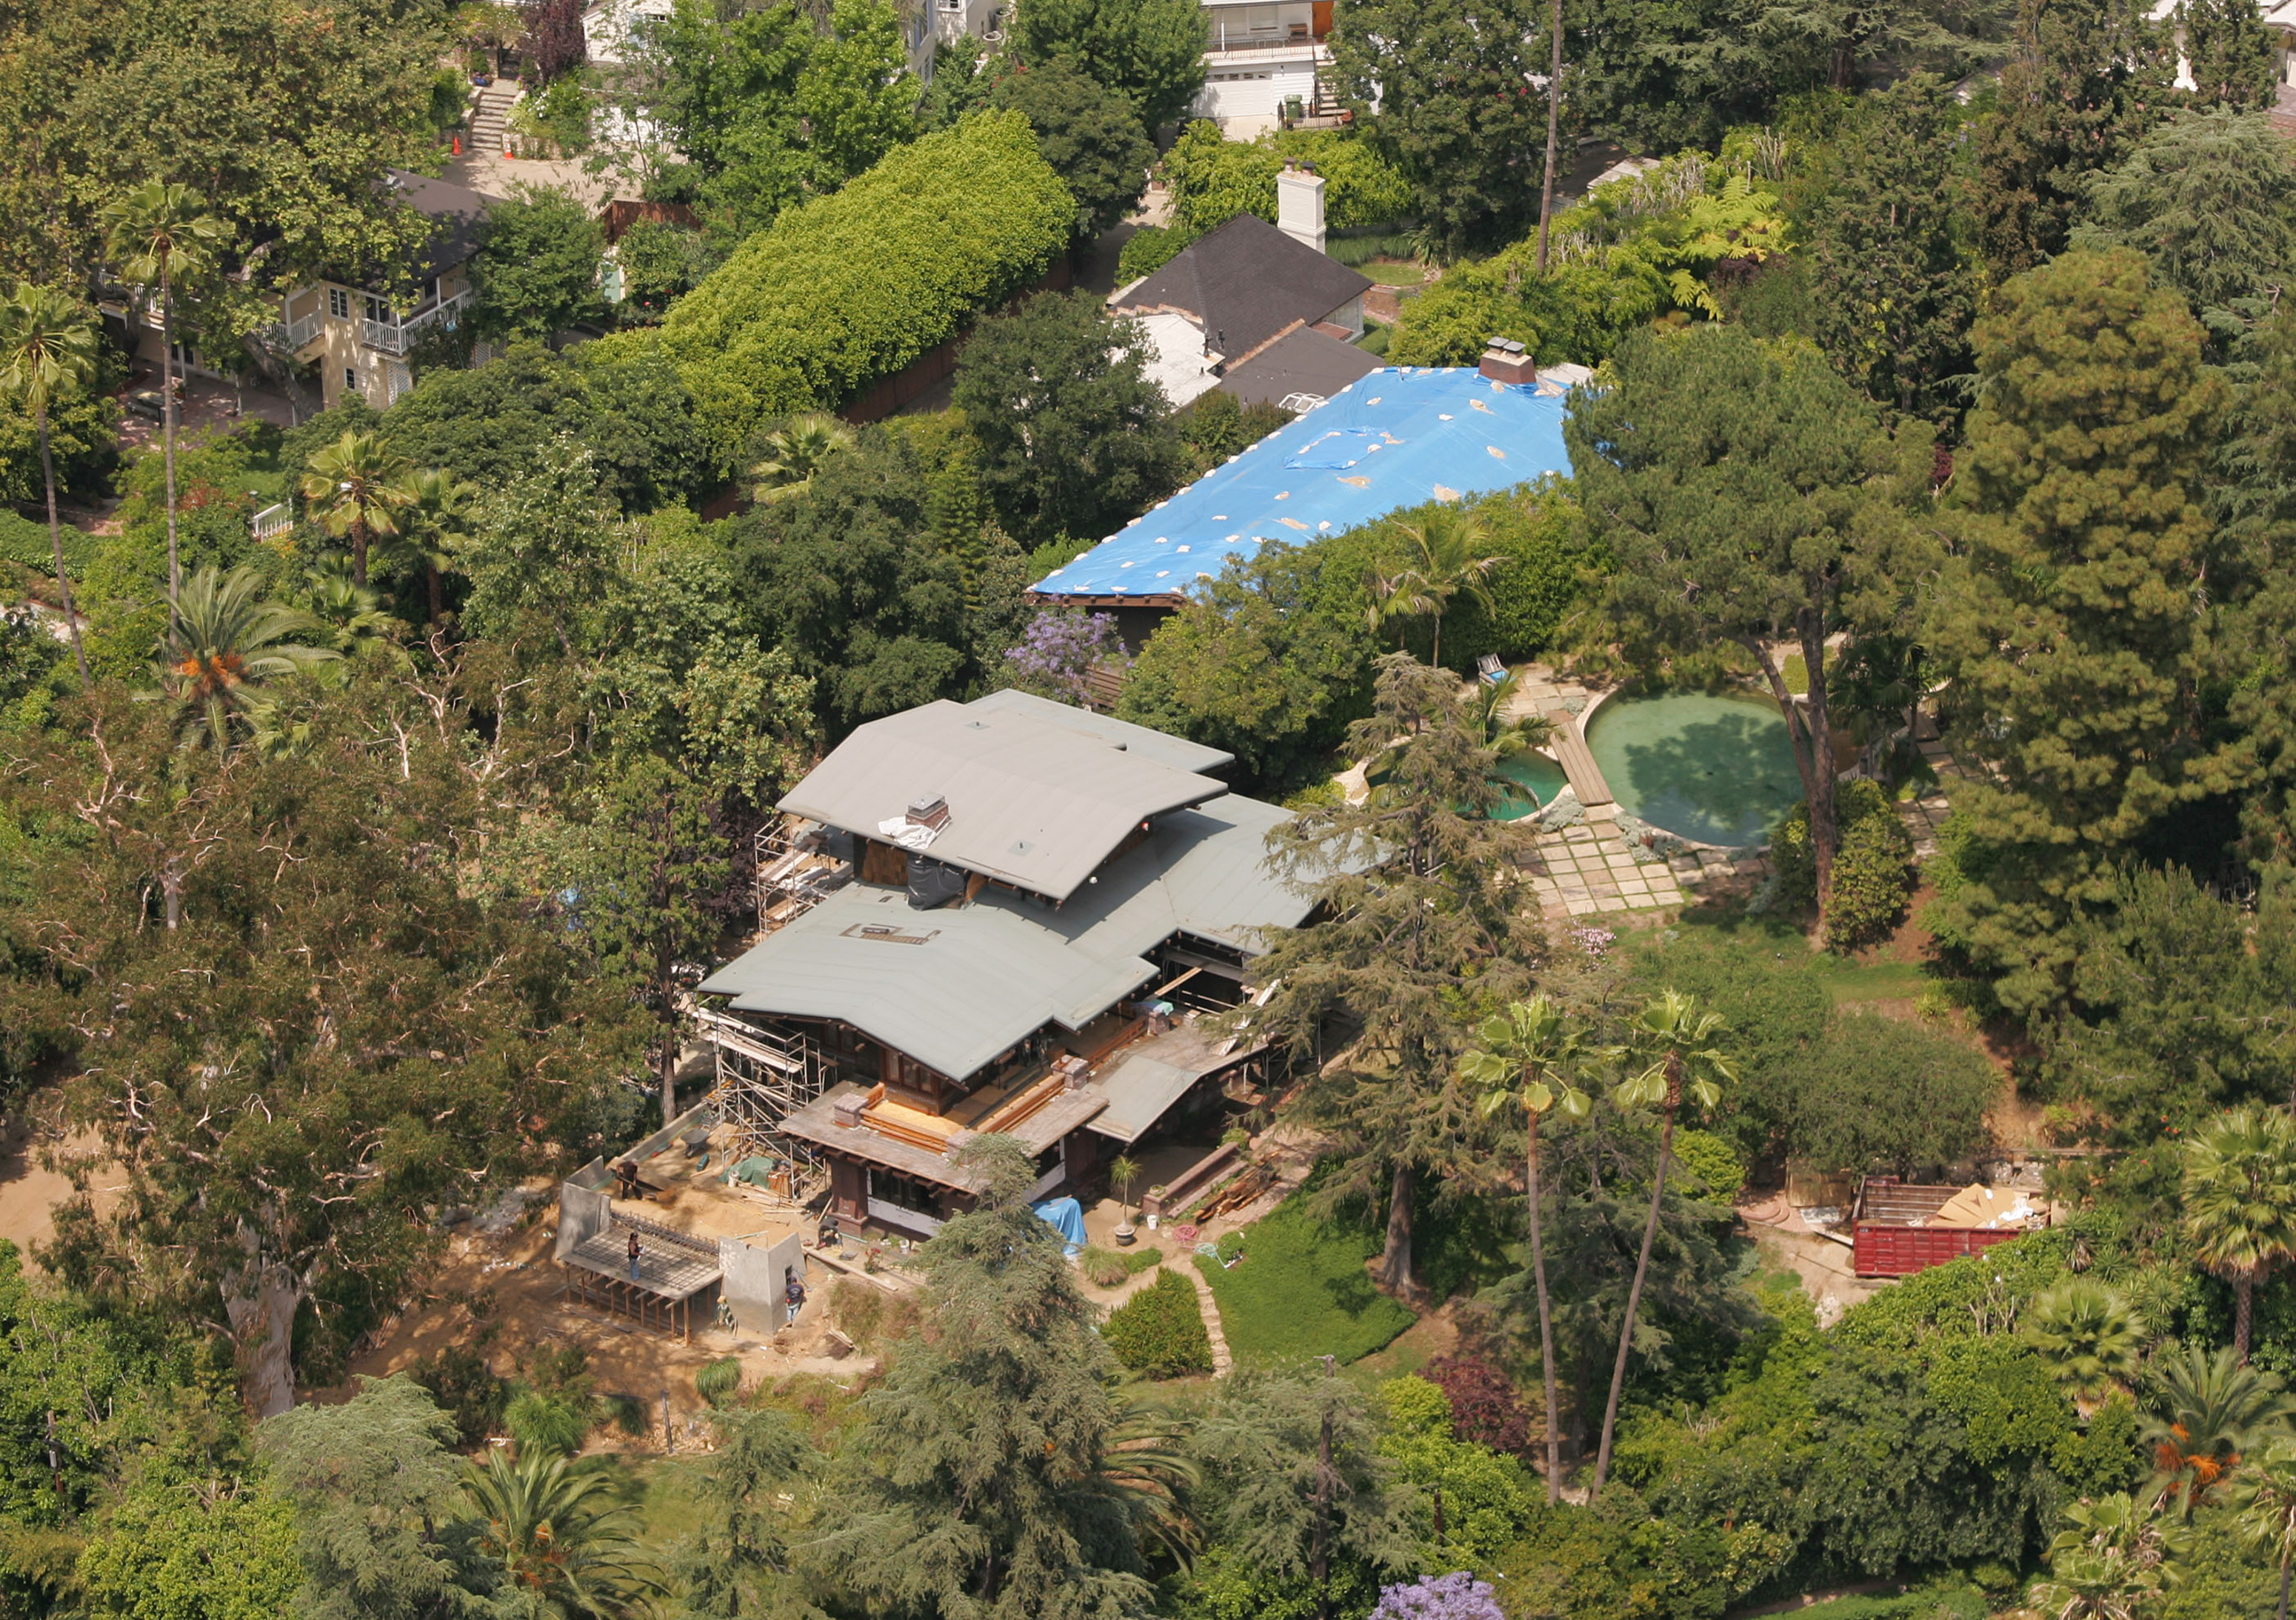 An aerial view of Brad Pitt's home in 2006 | Source: Getty Images